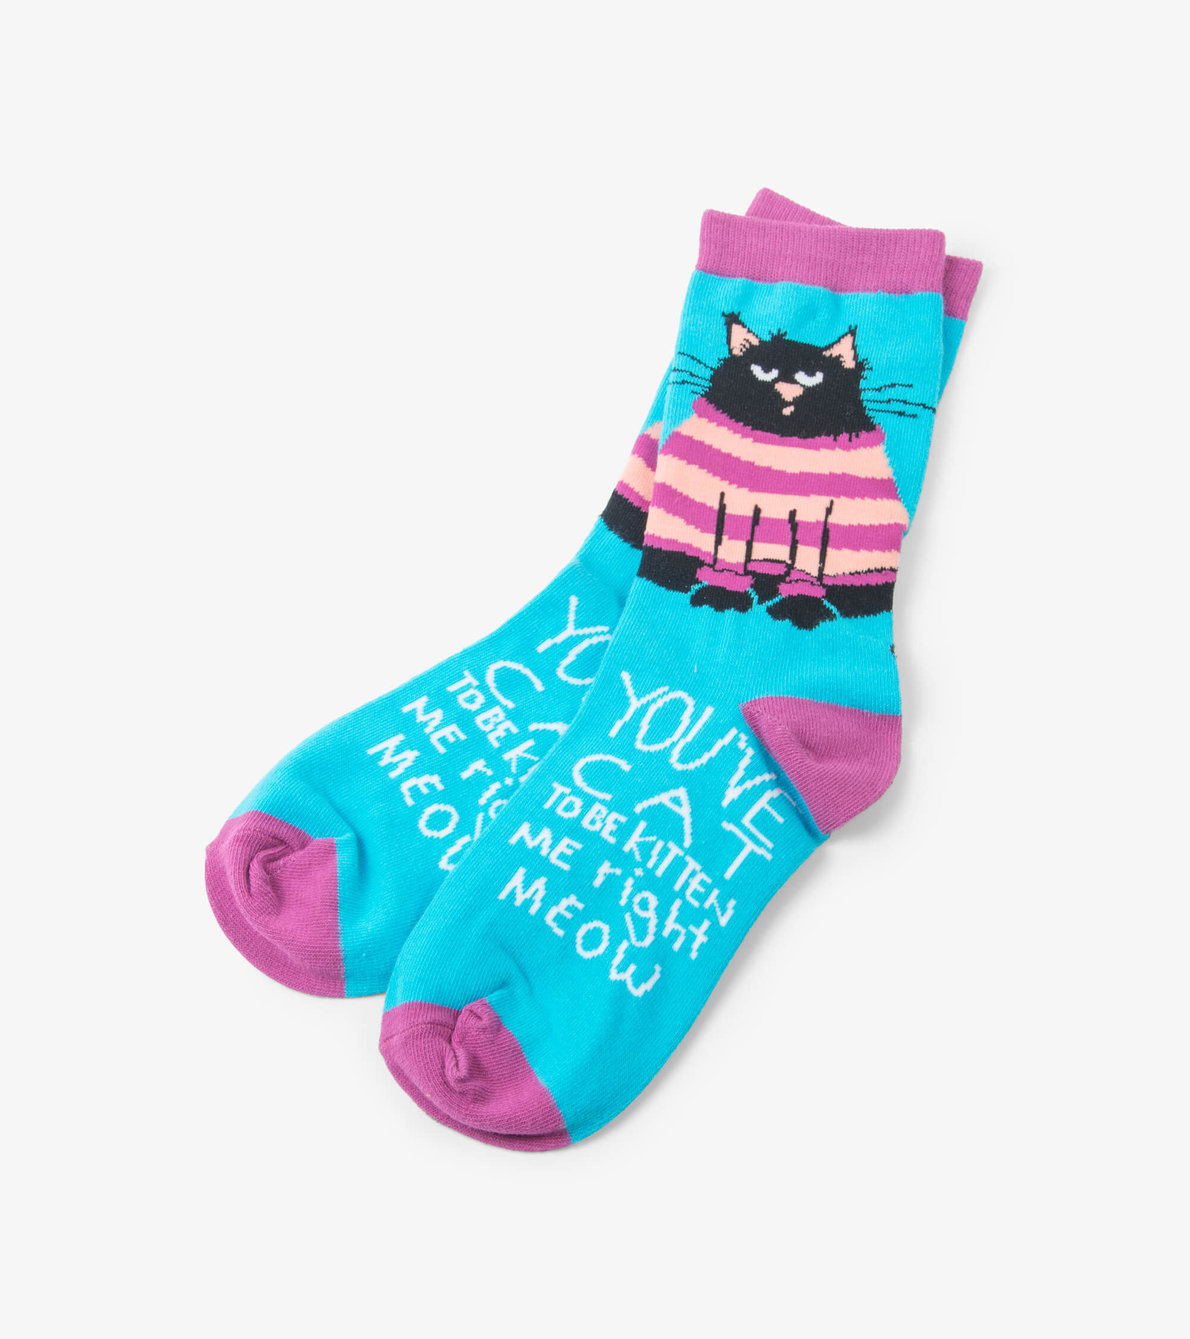 View larger image of You've Cat to be Kitten me right meow Women's Crew Socks